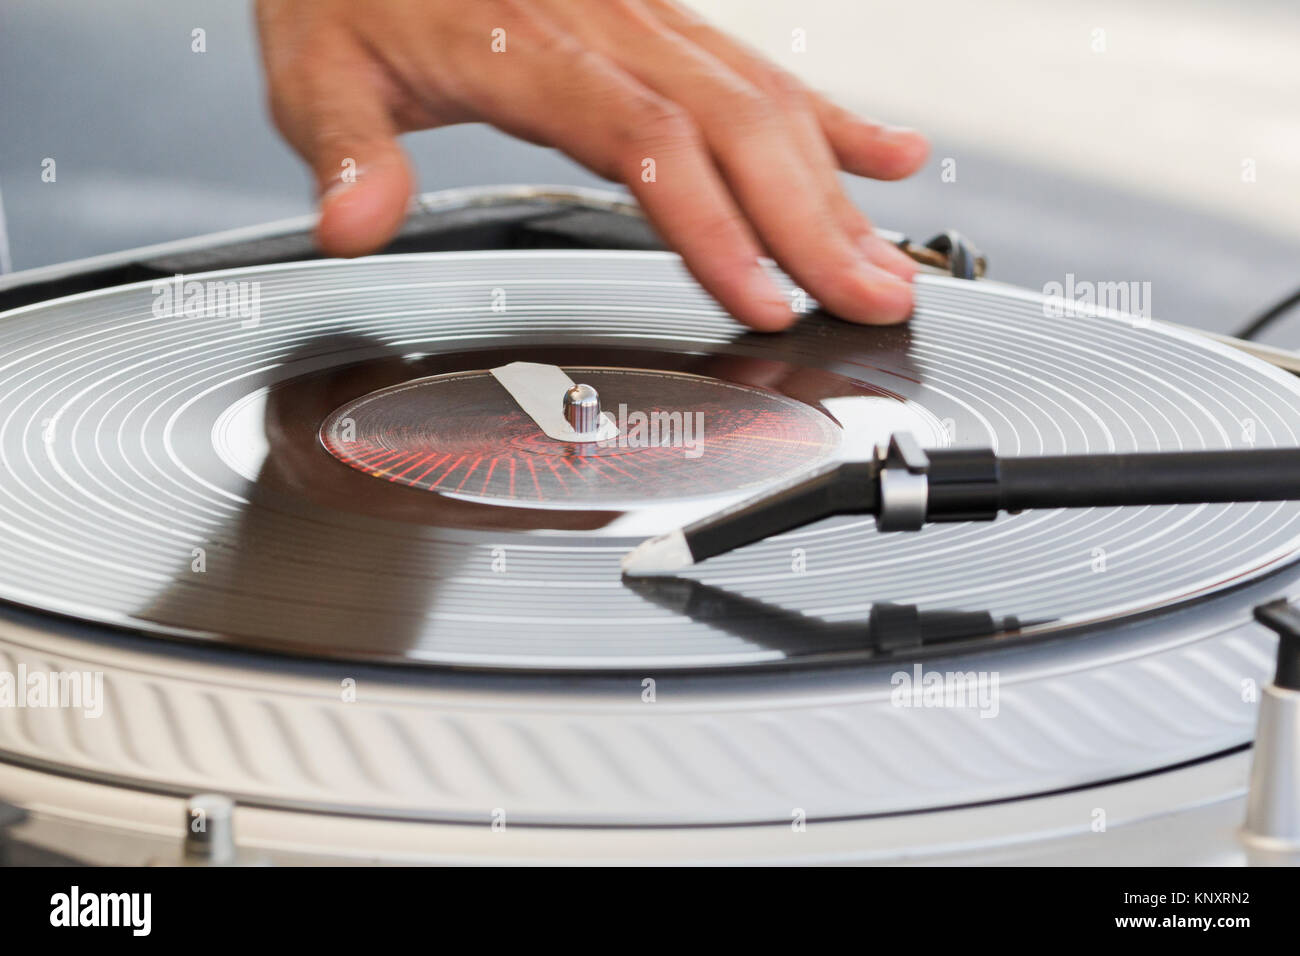 The dj uses vinyl records to mix electronic music and beat rap